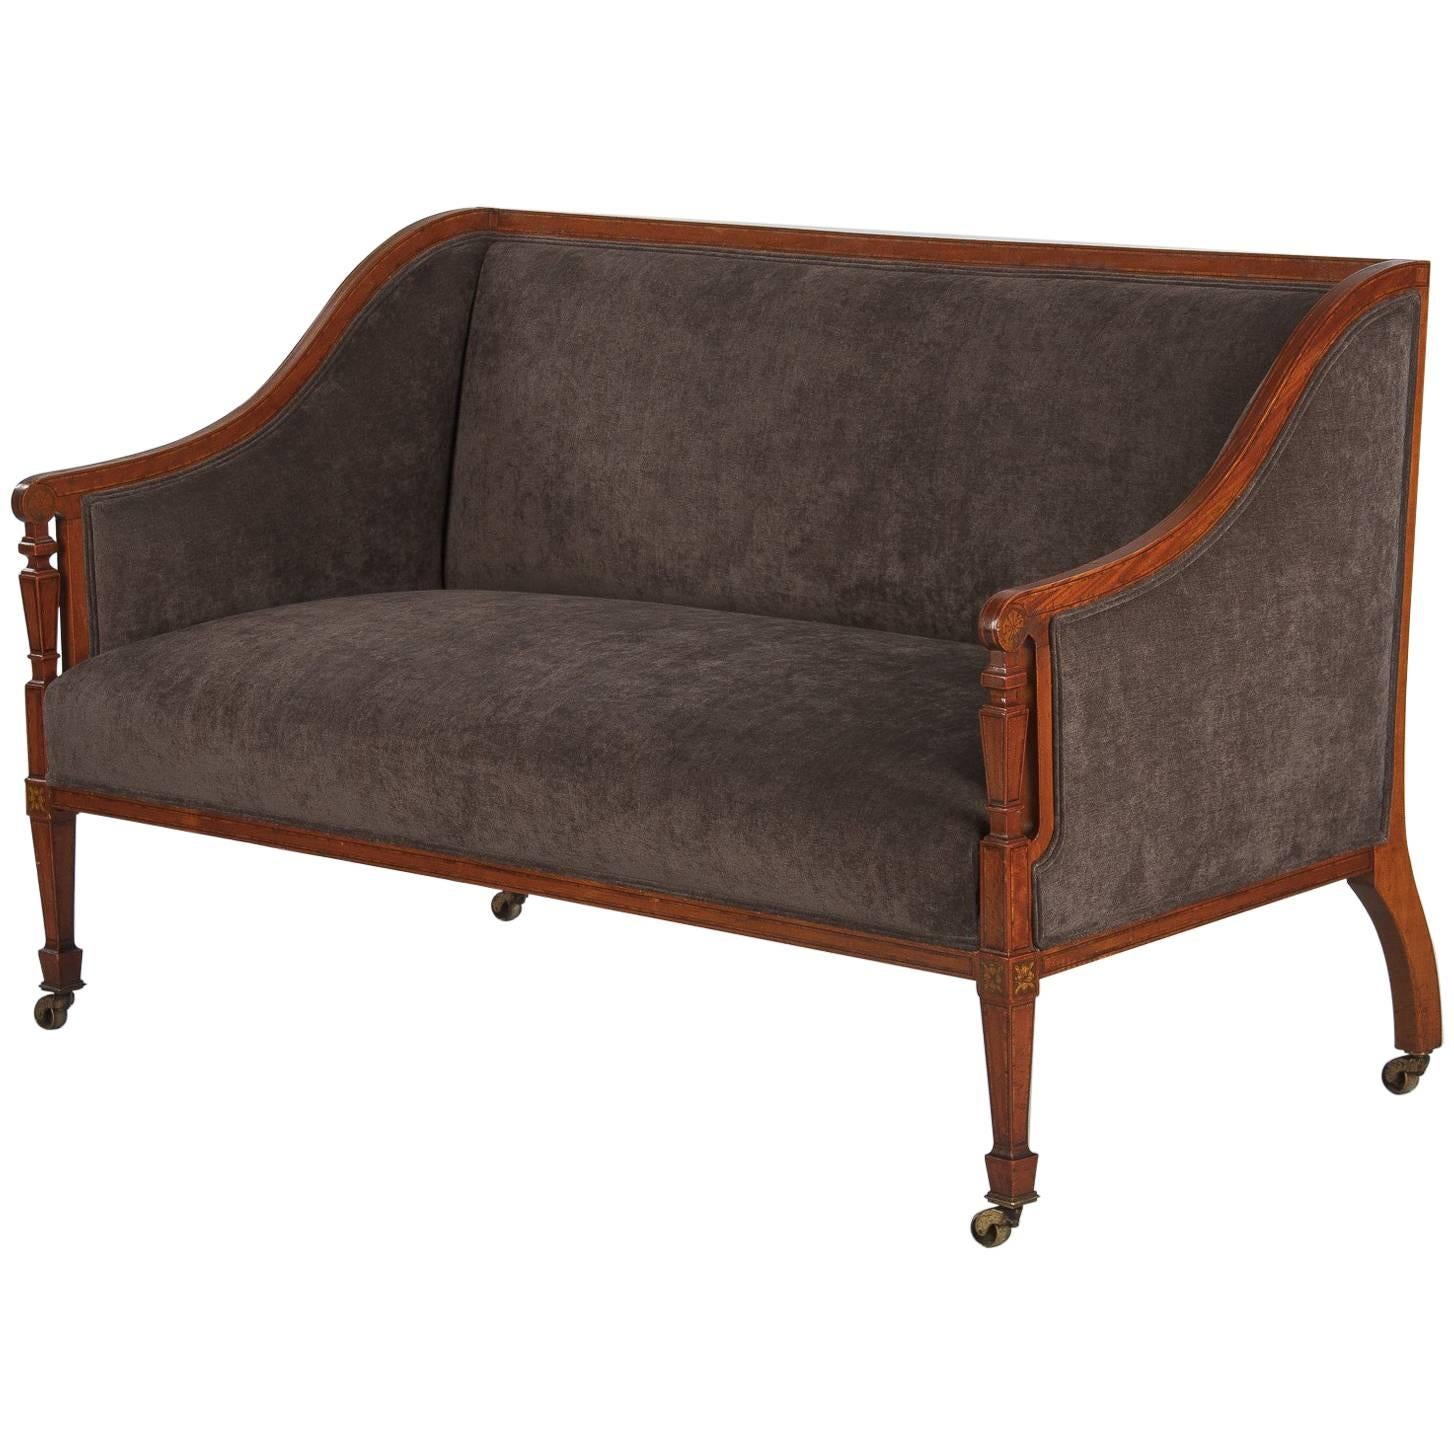 French Directoire Style Upholstered Sofa in Mahogany, Late 1800s